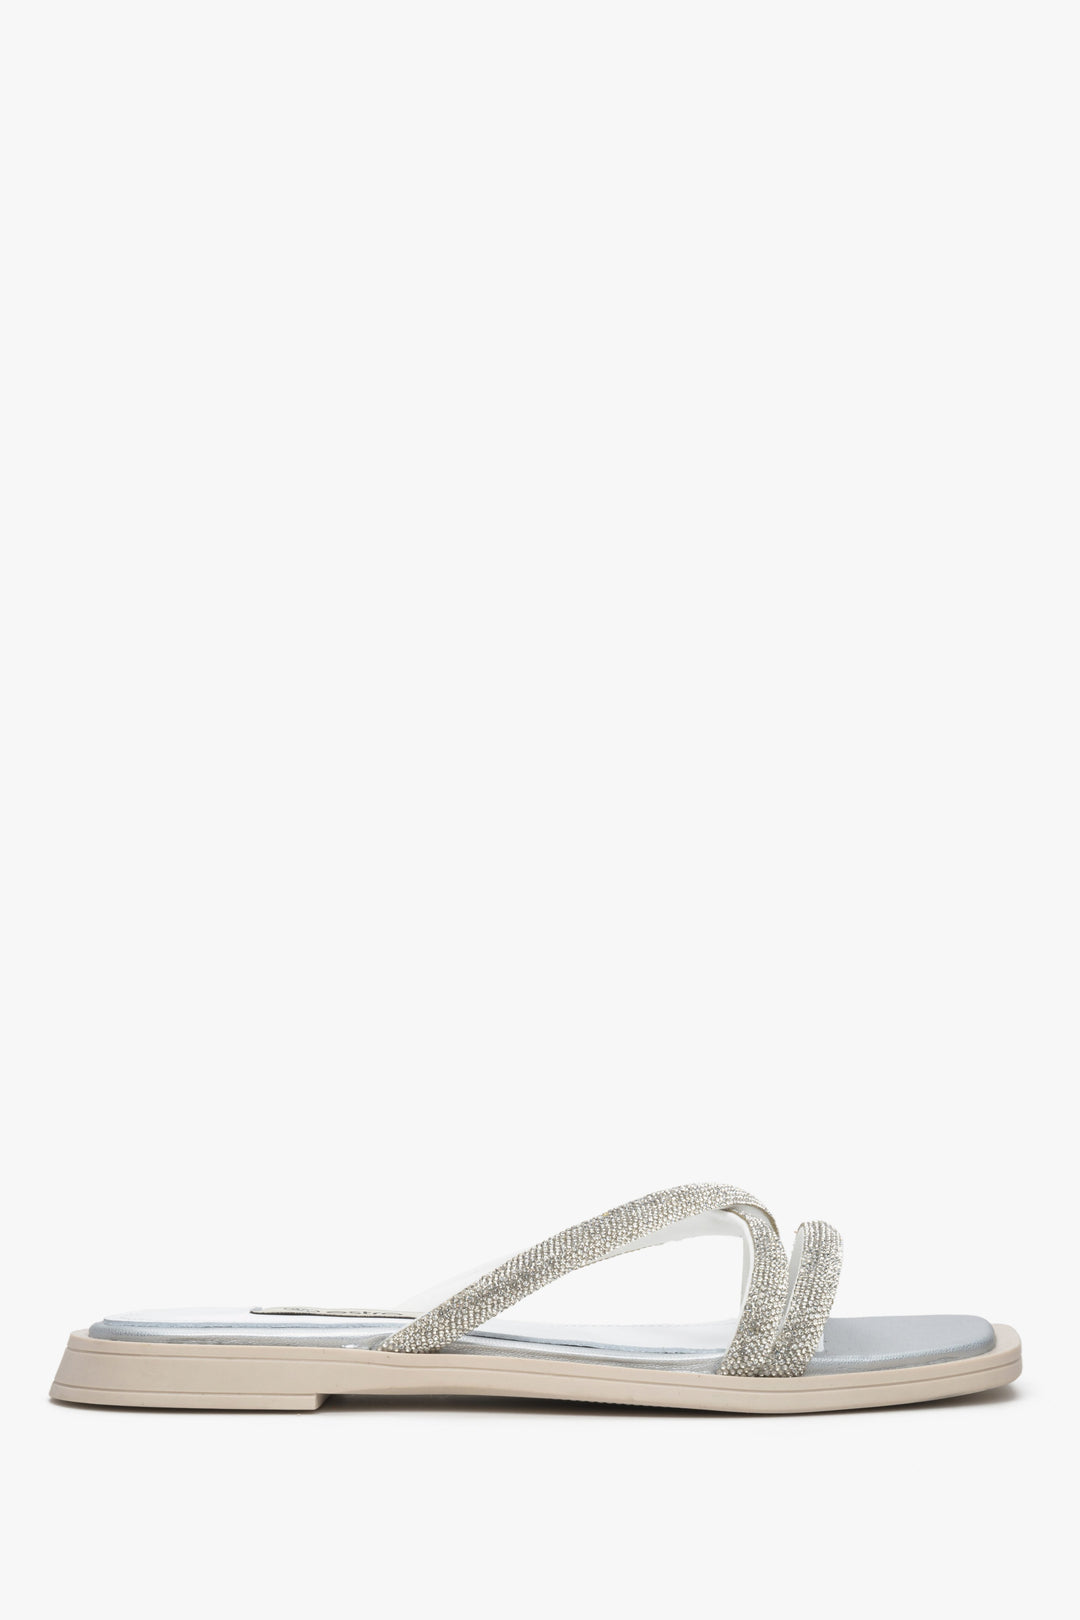 Women's silver flat slide sandals with a decorative zirconia.